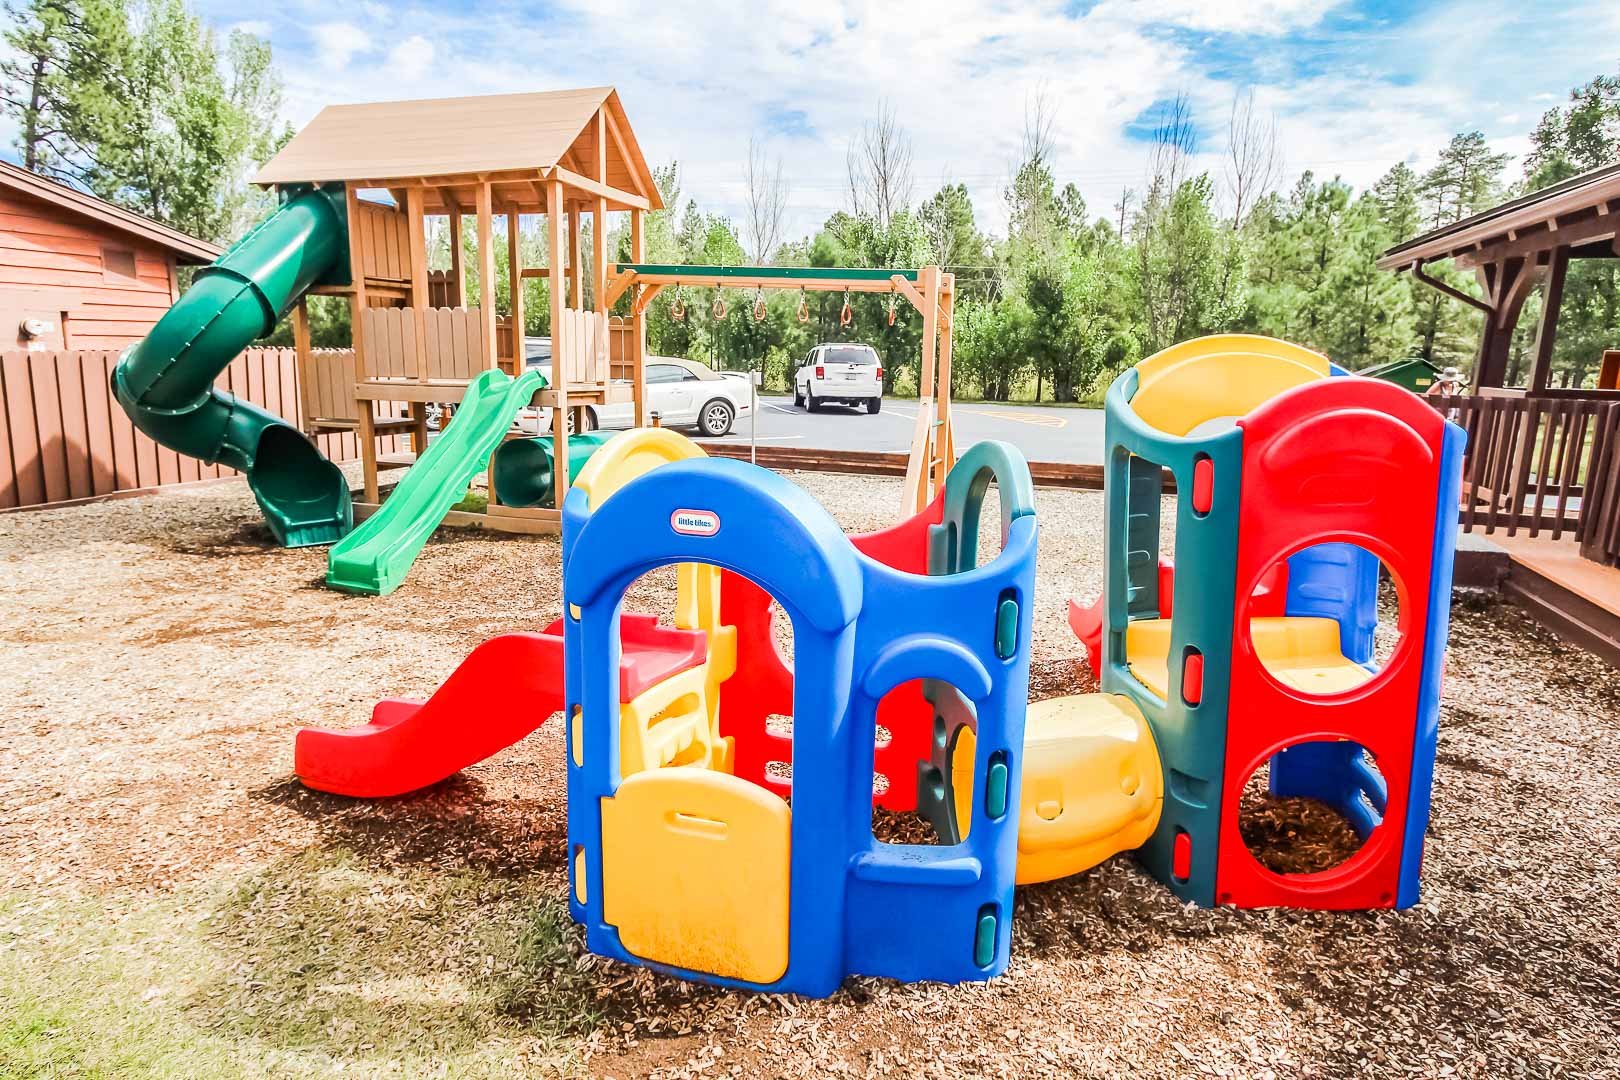 A colorful children play set at VRI's Roundhouse Resort in Pinetop, Arizona.